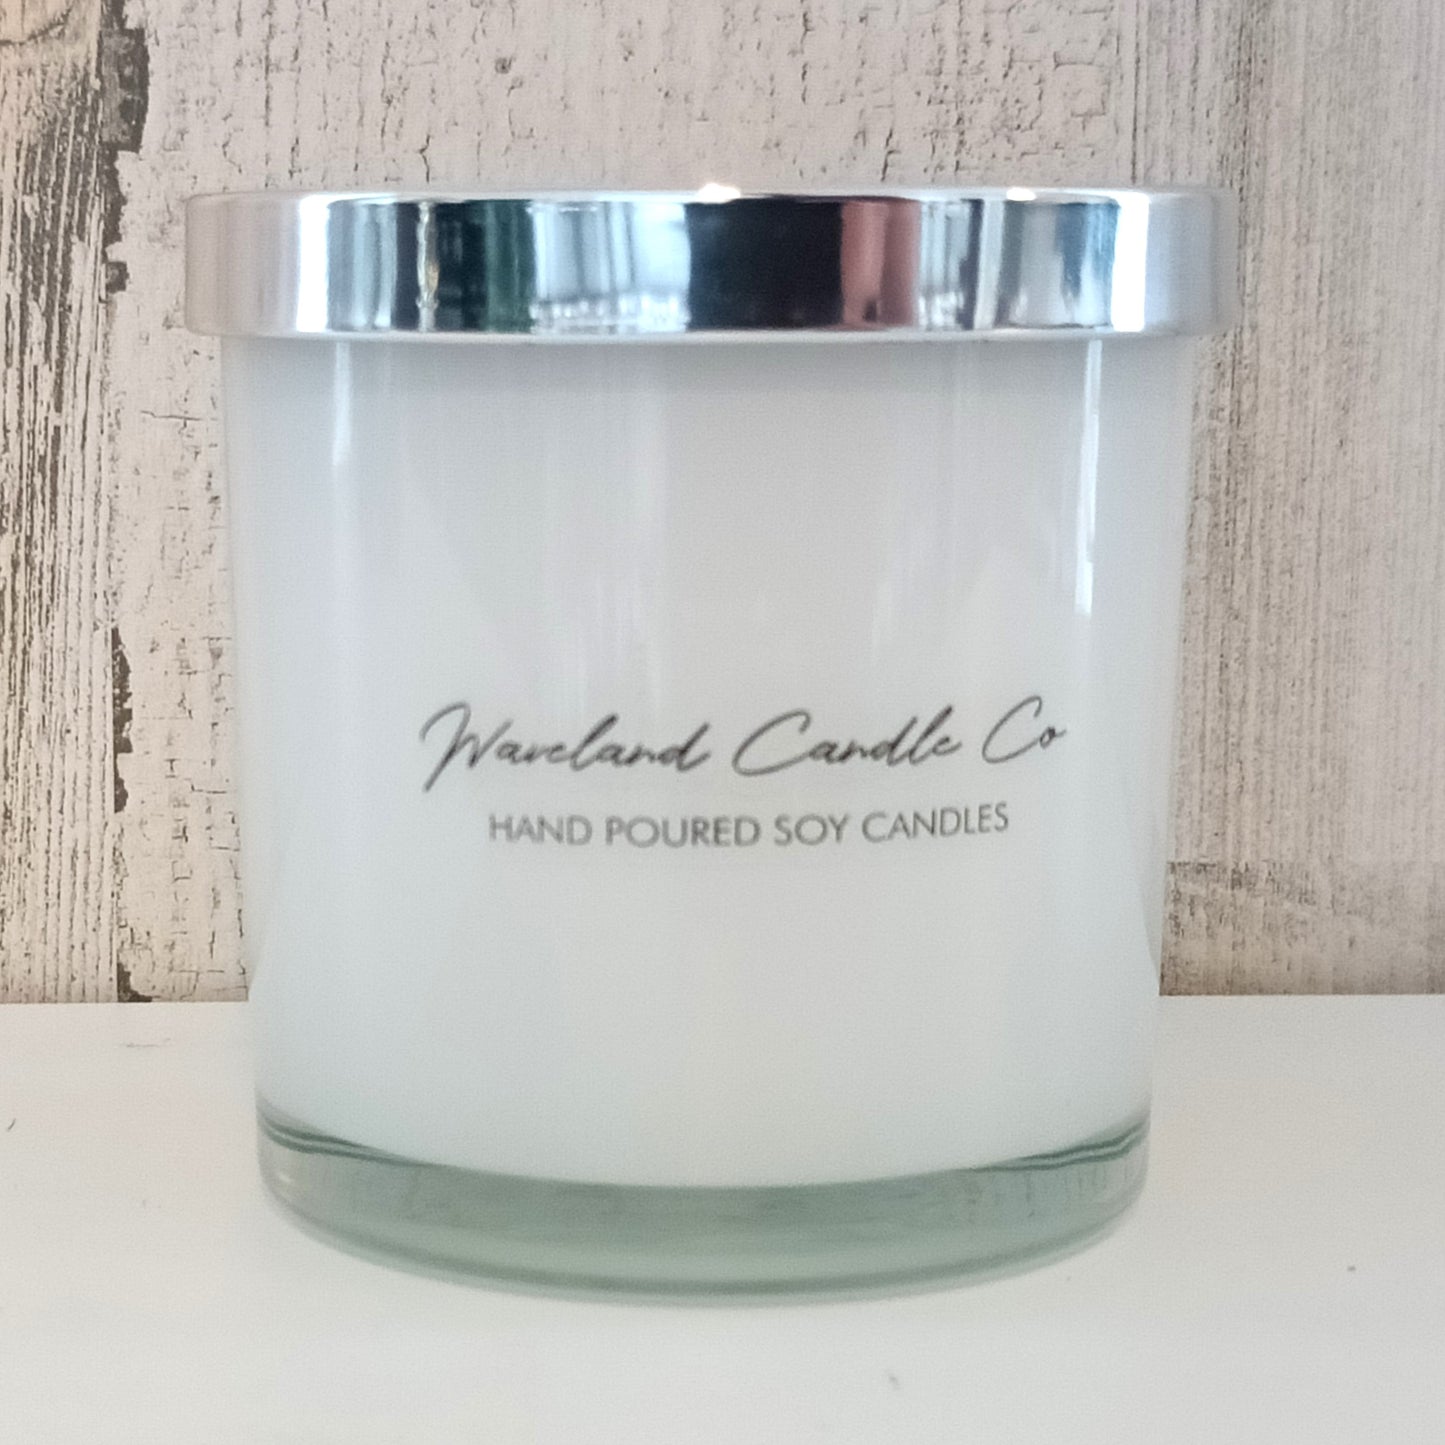 Sea Salt & Lotus Blossom - Monticiano Milk White Glass Soy Candle